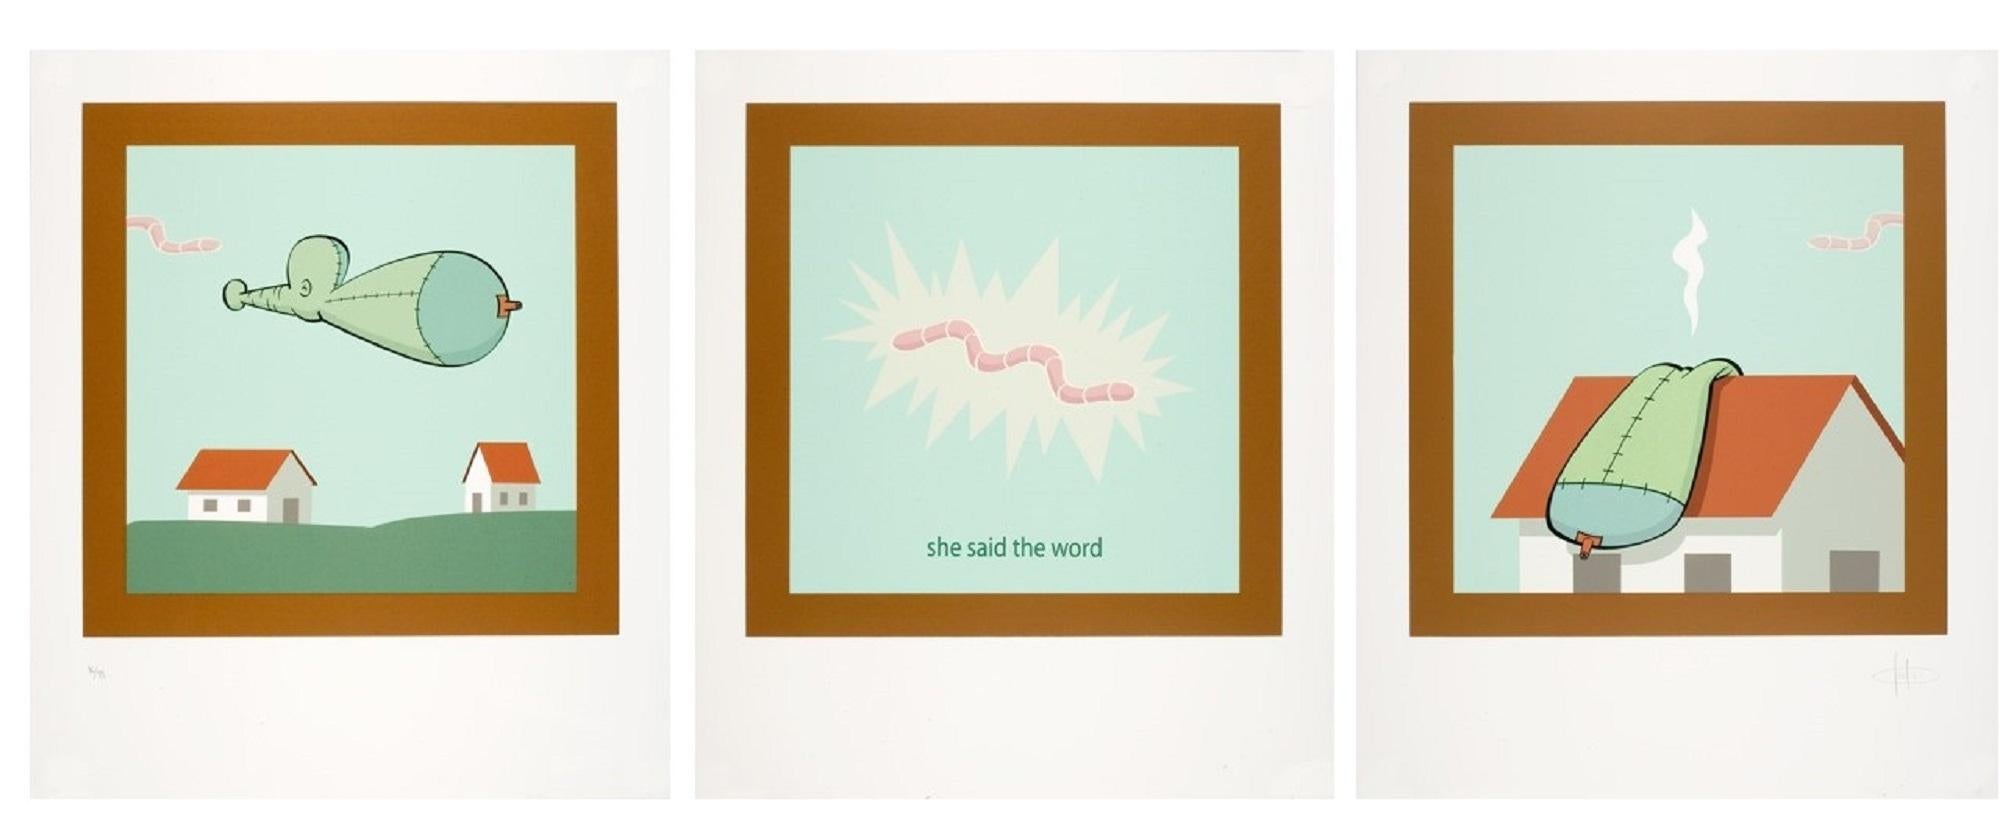 Fabian Ugalde (Mexico, 1967)
'The word power' (Triptych), 2006
silkscreen on paper
27.6 x 69.9 in. (70 x 178 cm.)
Edition of 99
ID: UGA1739-002-109
Hand-signed by author in pencil